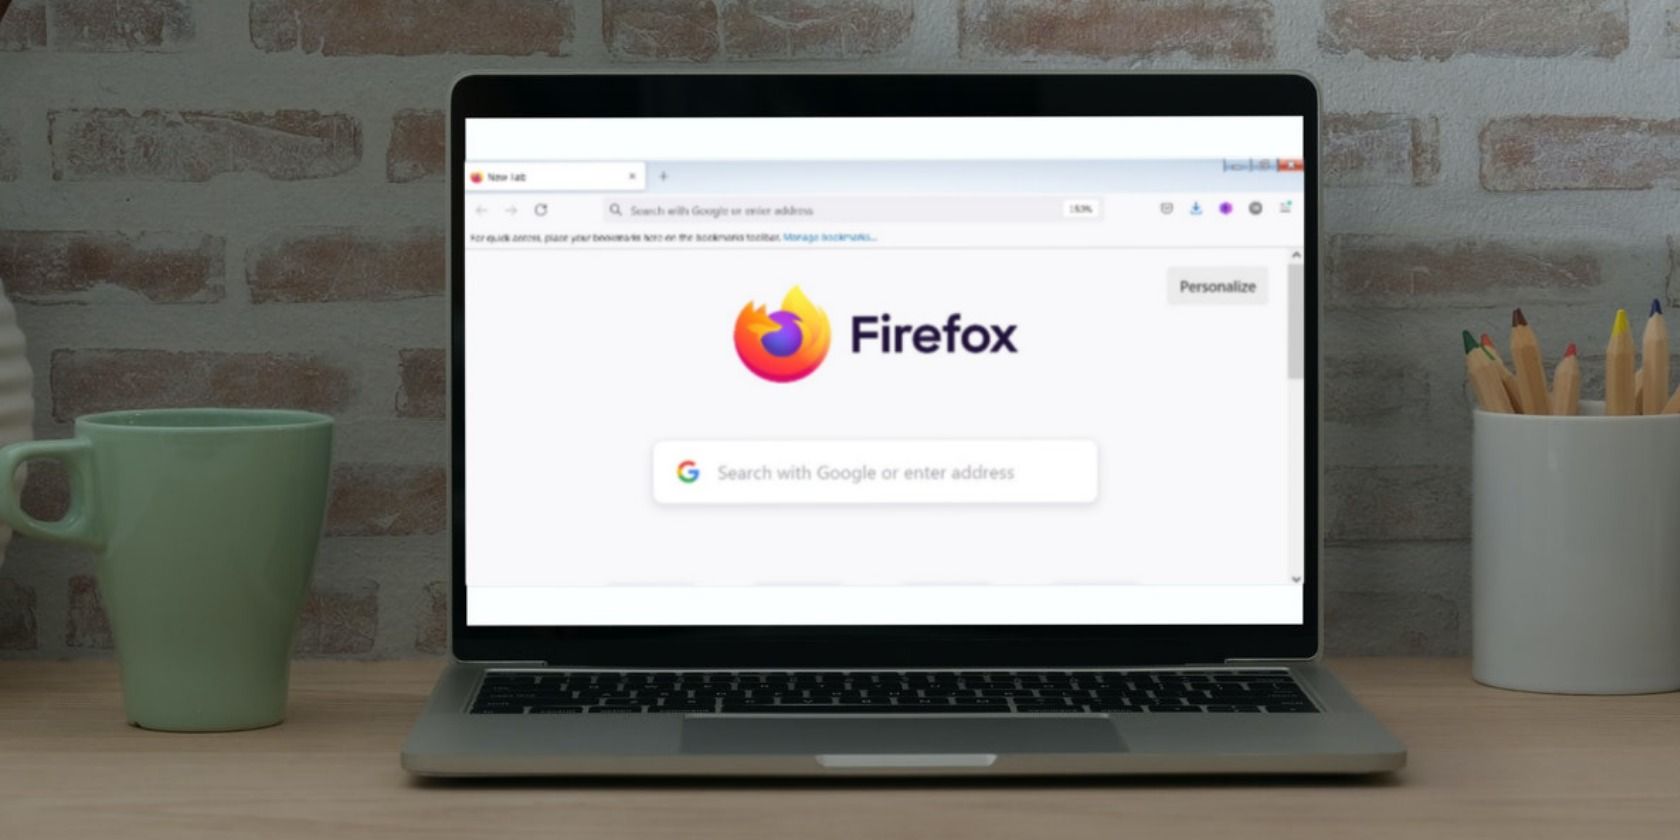 Firefox browsing page on laptop